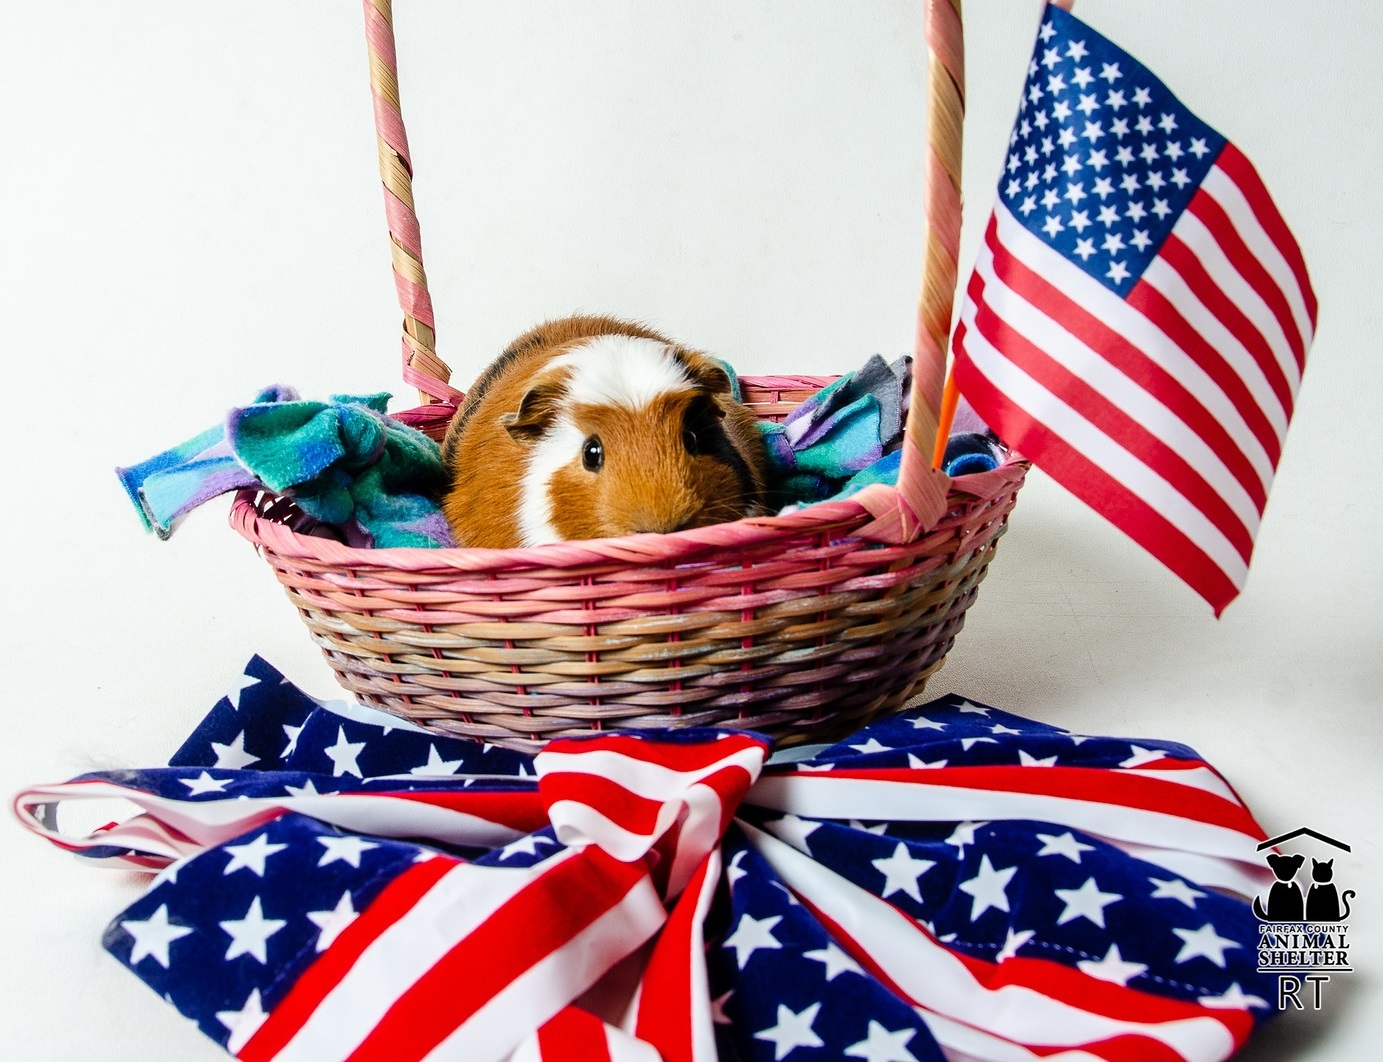 A guinea pig hides in a basket, with two US flags nearby.